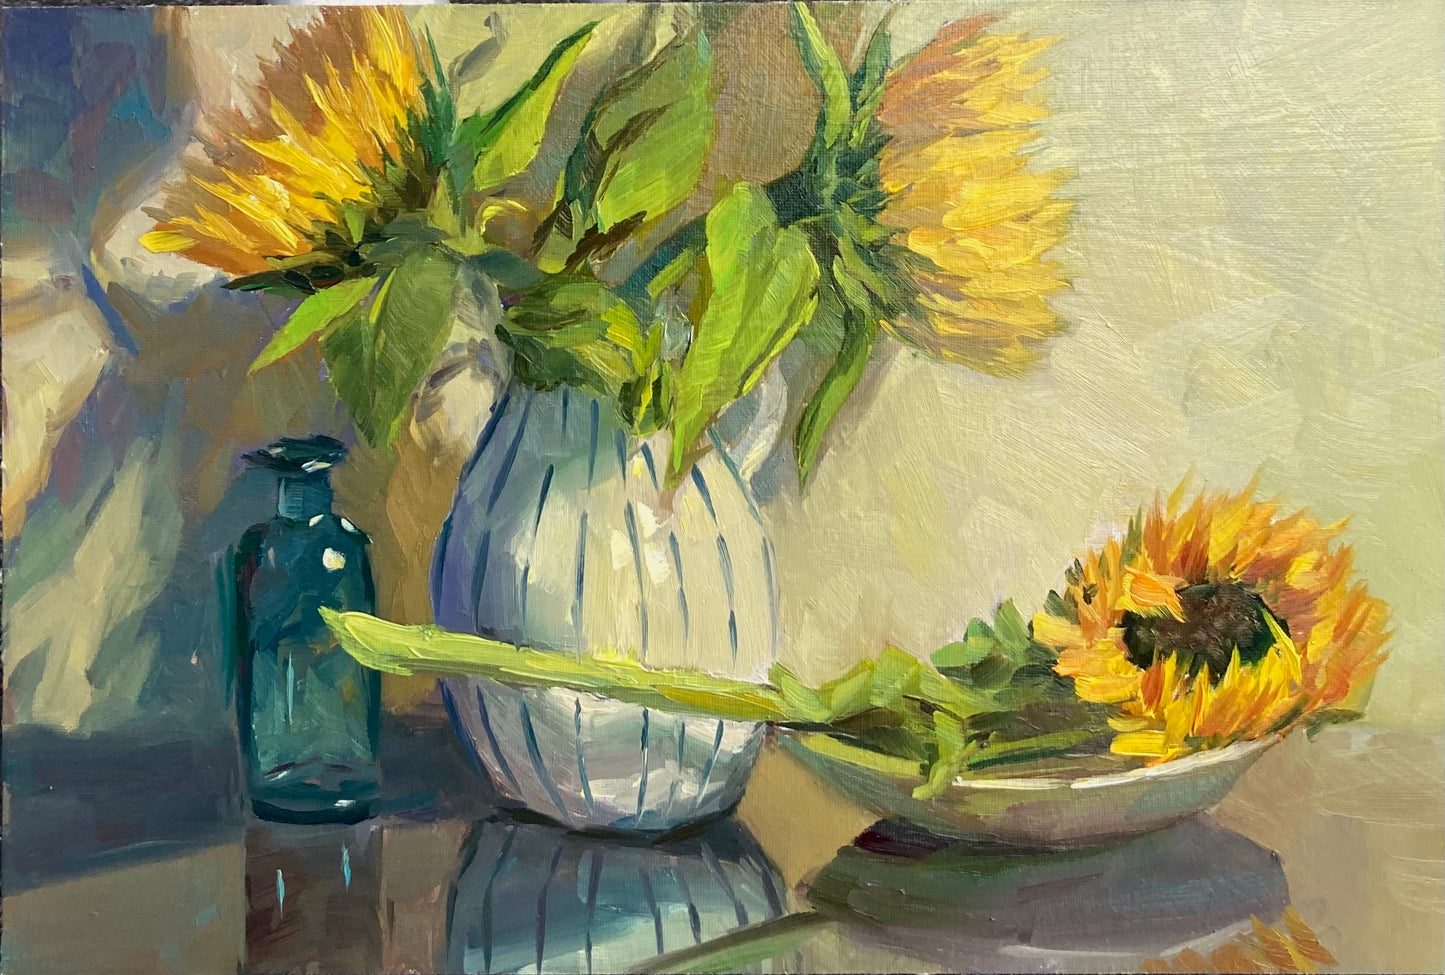 Sunflower Series 18 - Original Stilllife Painting, 12 by 8 inches